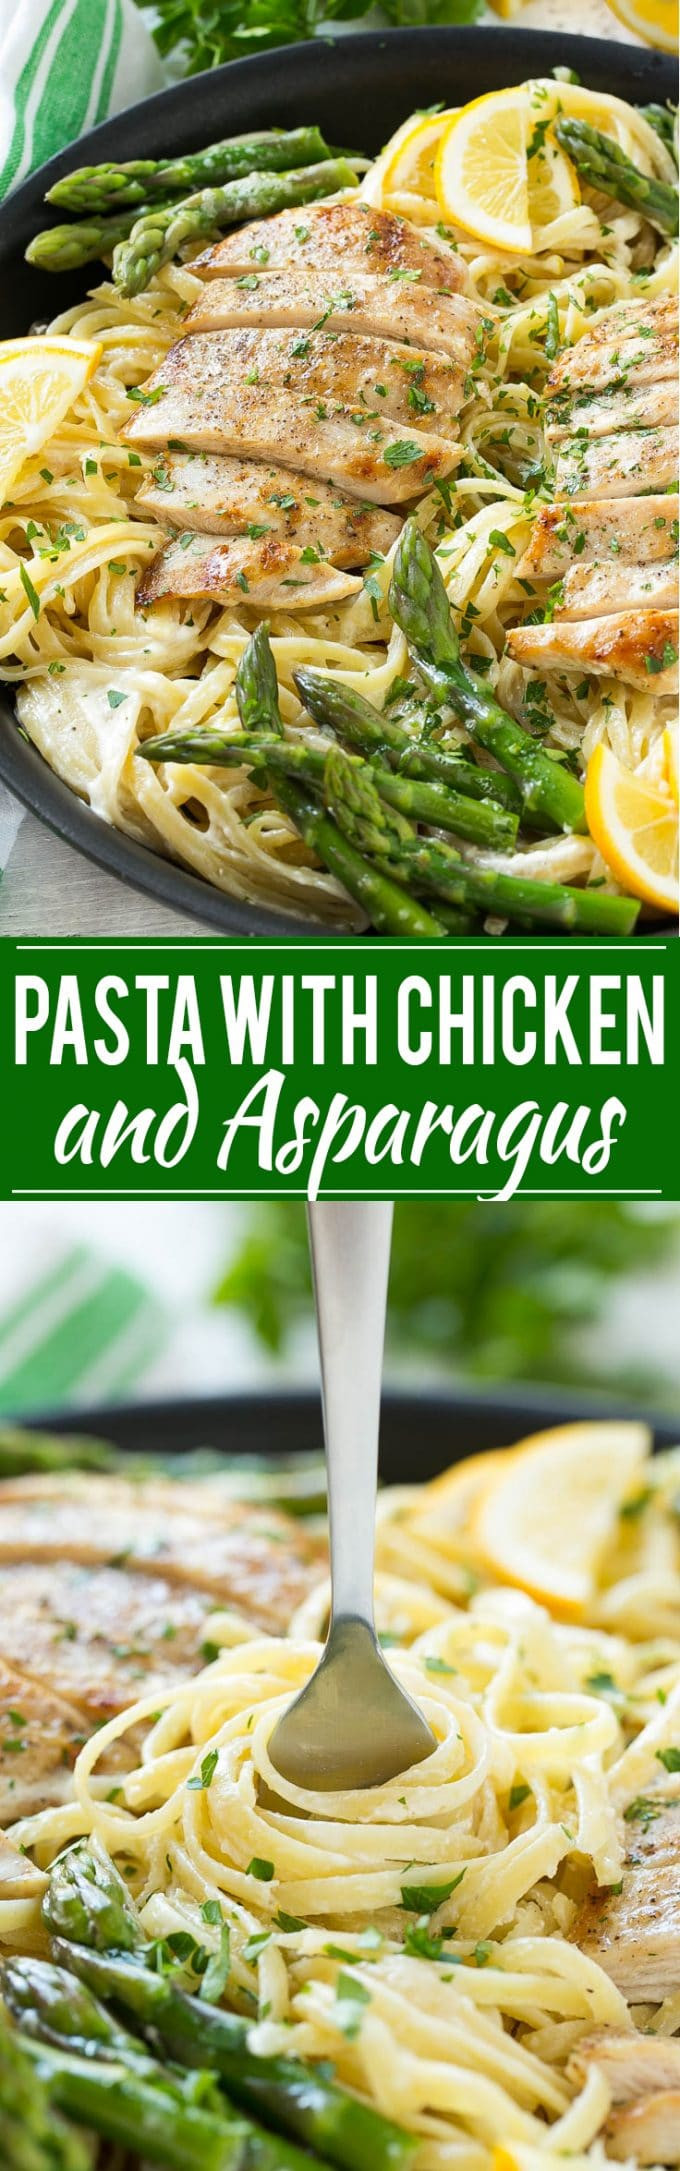 Healthy Asparagus Recipes
 healthy chicken and asparagus pasta